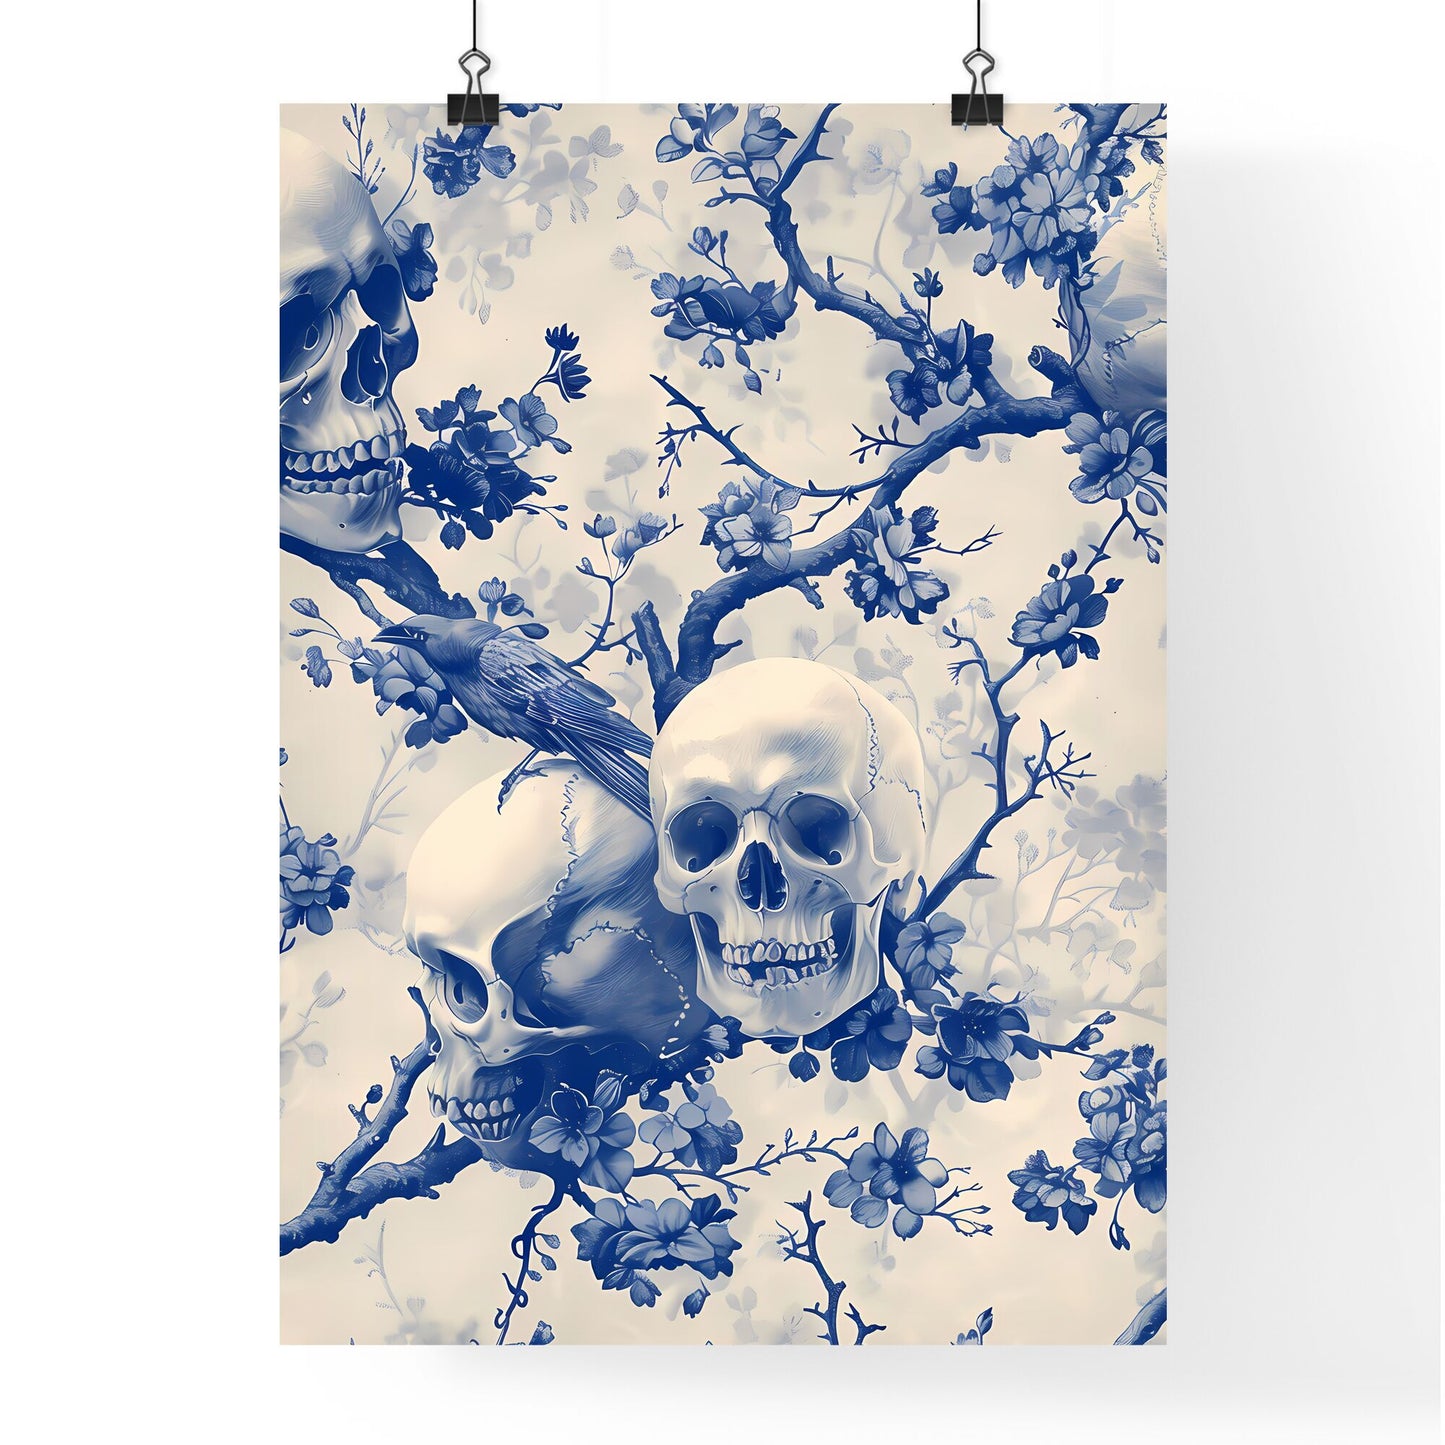 Striking 18th Century Chinoiserie Wallpaper Pattern with Skulls, Ravens, Tree Branch, Strong Linework, Macabre Motifs, Blue and White Contrast Default Title